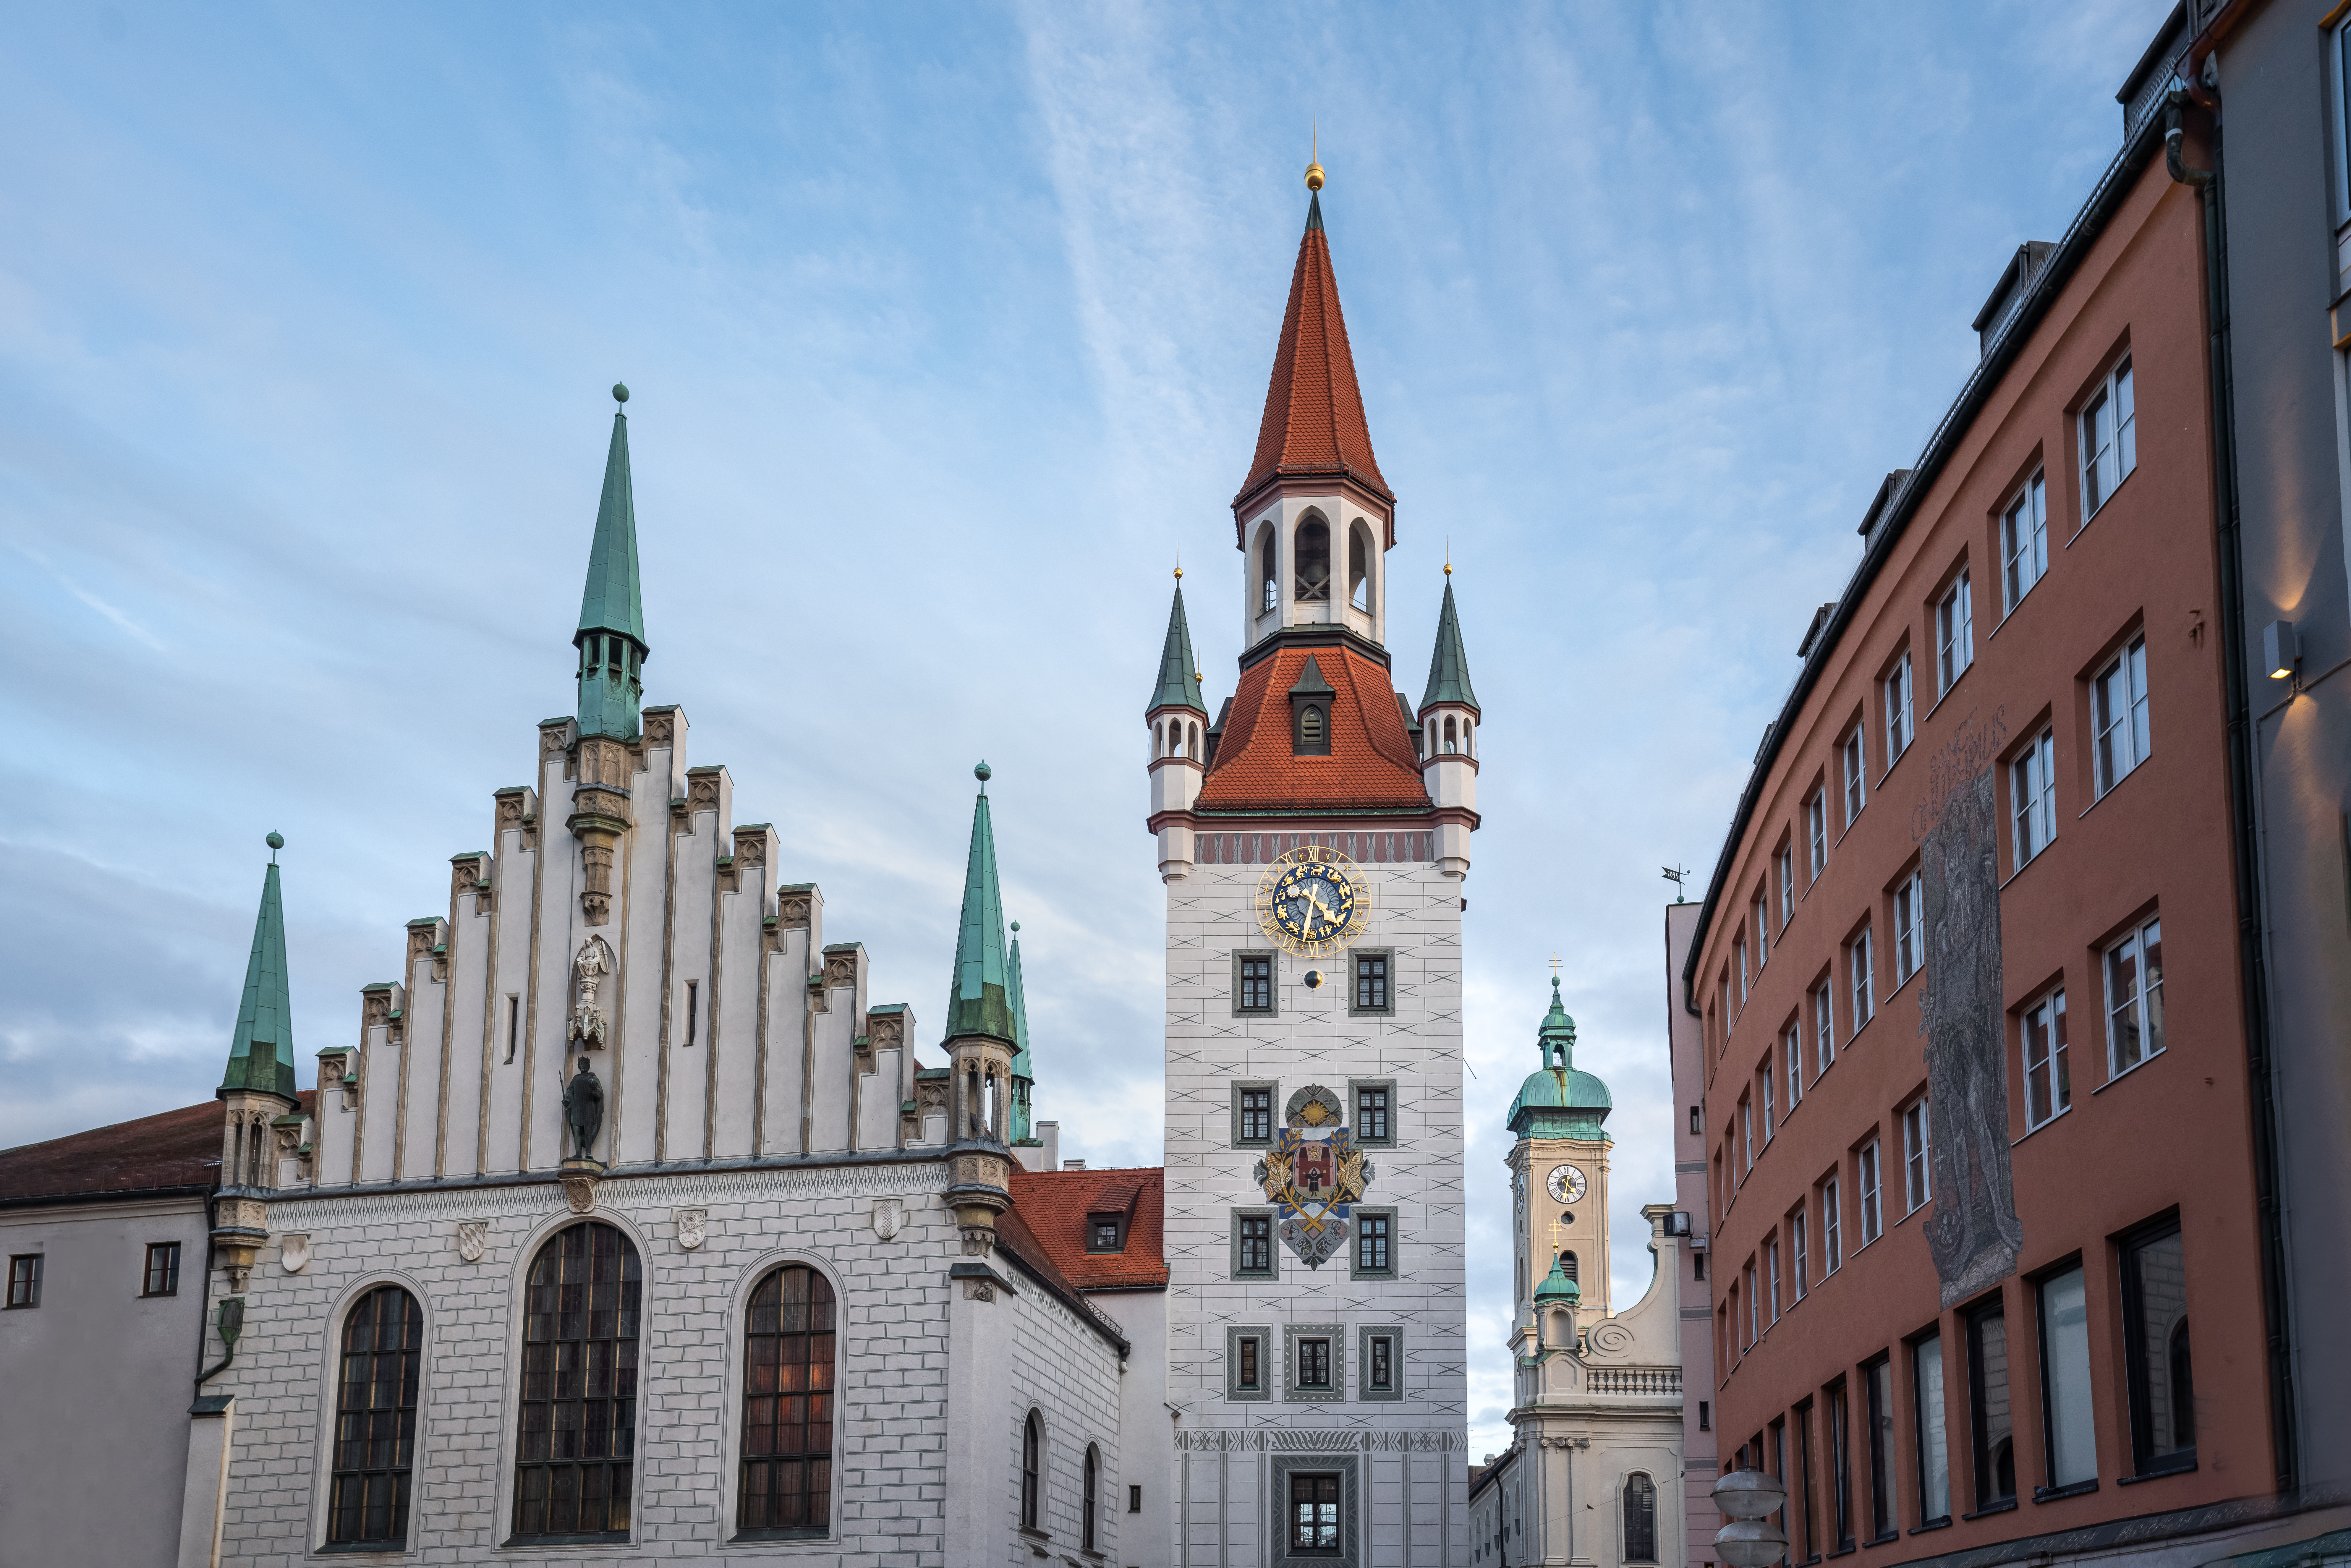 Seeing Munich's Old Town by Foot in One Hour - the Altes Rathaus, or Old Town Hall is now a toy museum.